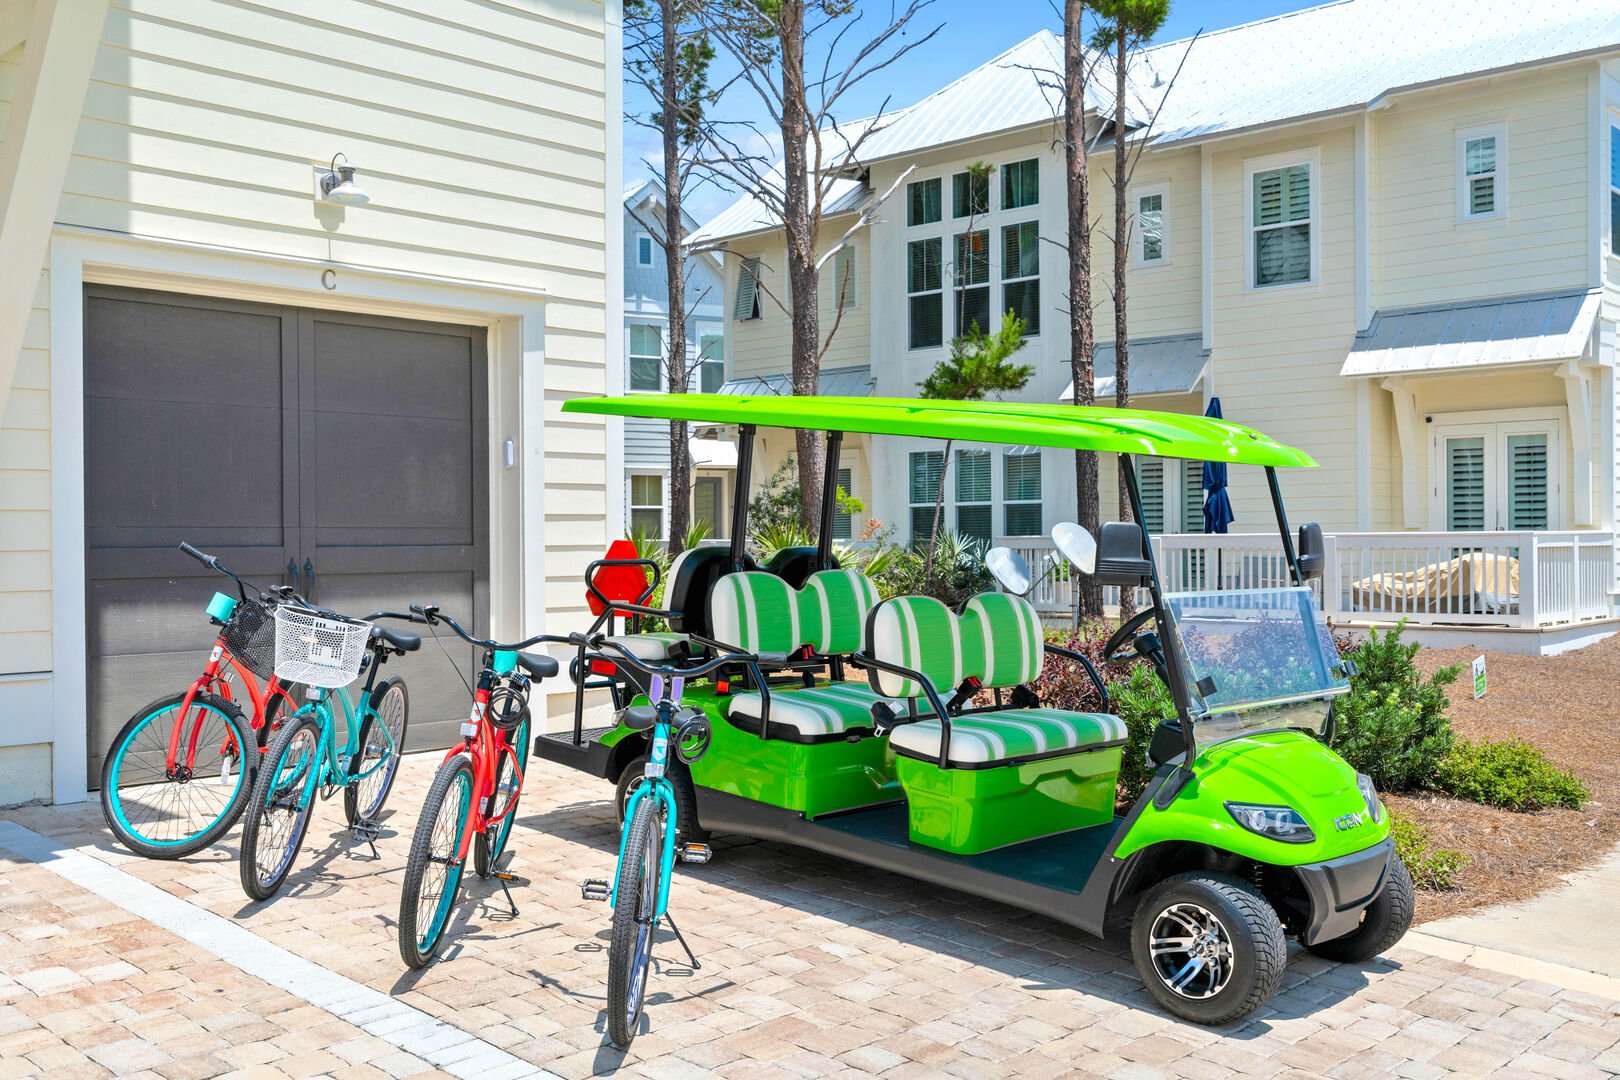 6-seater golf cart and 4 Heron bicycles included complimentary to enjoy scenic 30a!